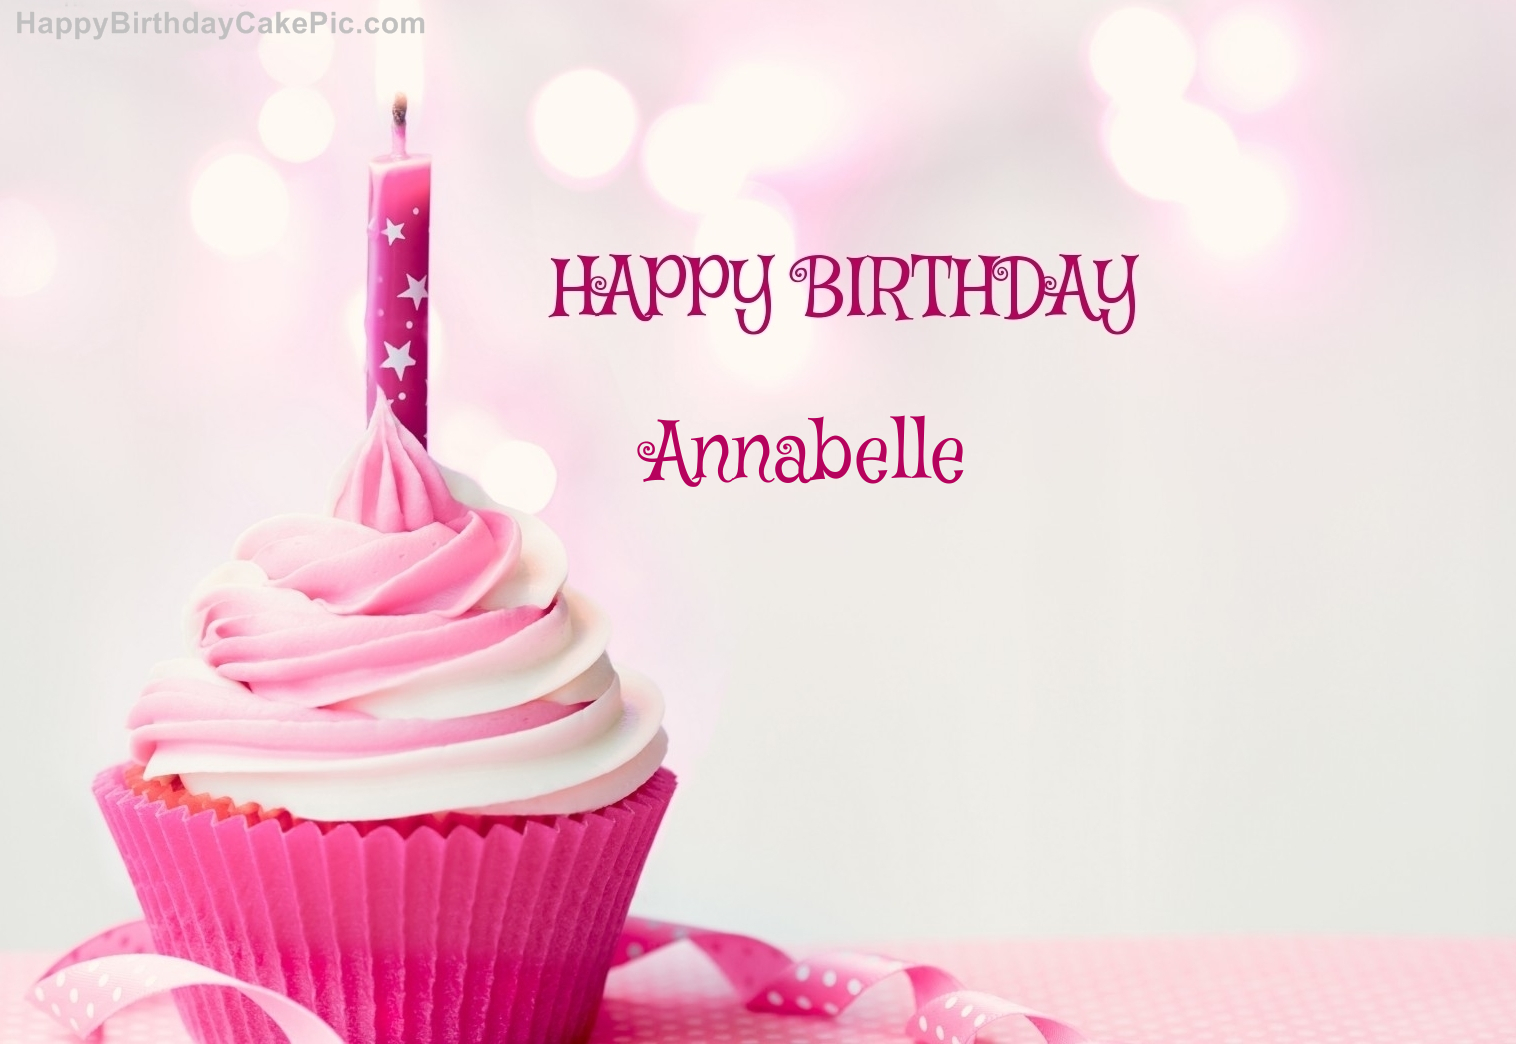 Image result for happy birthday annabelle cupcake images